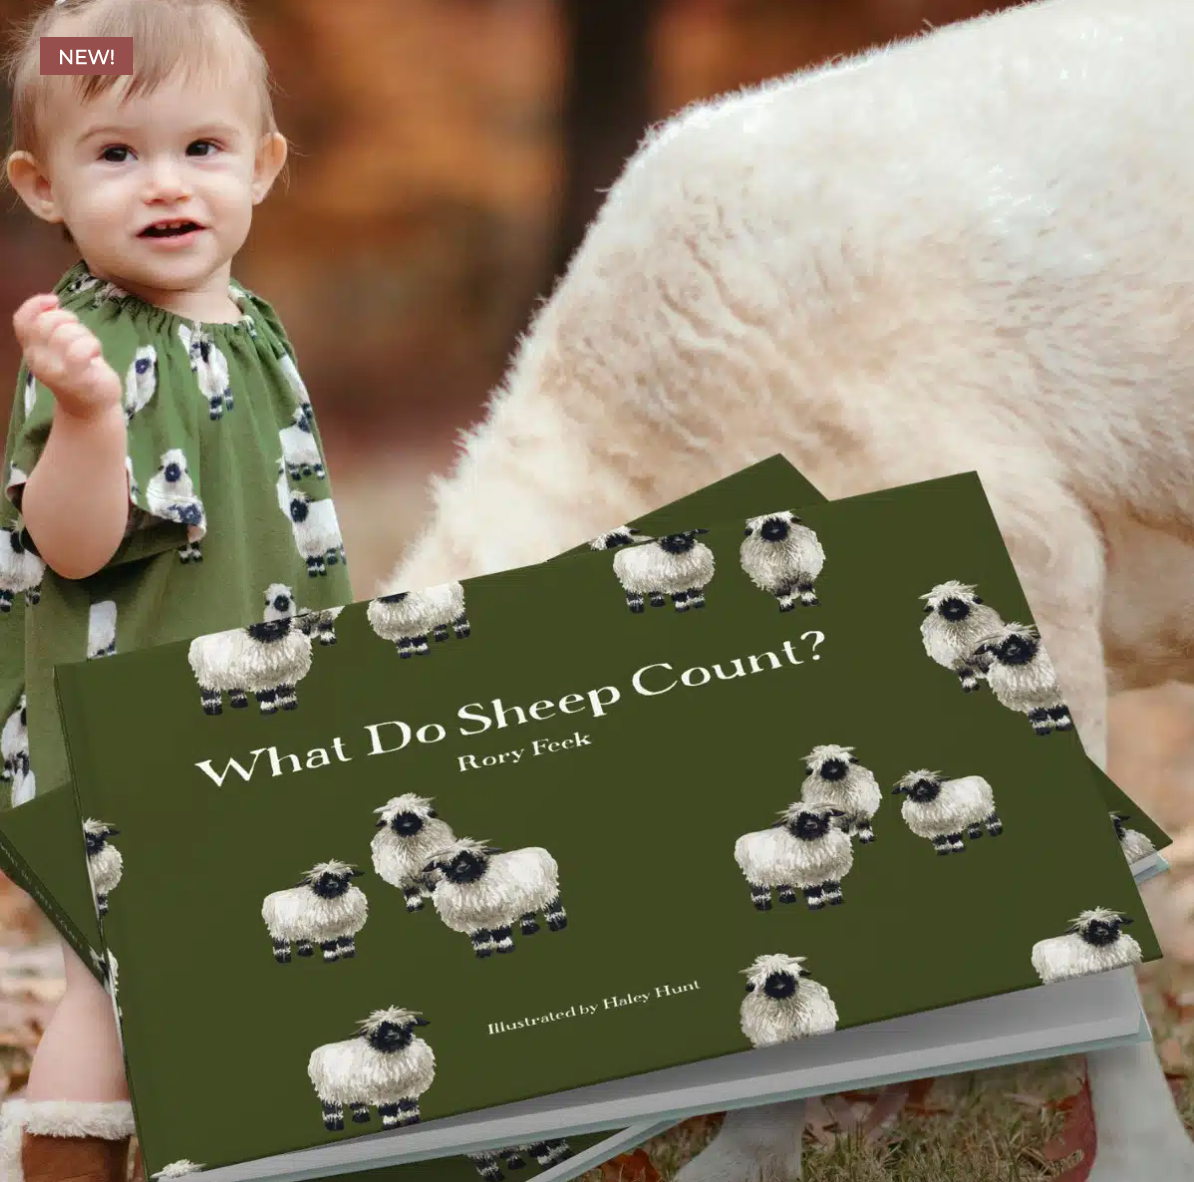 What Do Sheep Count? Book